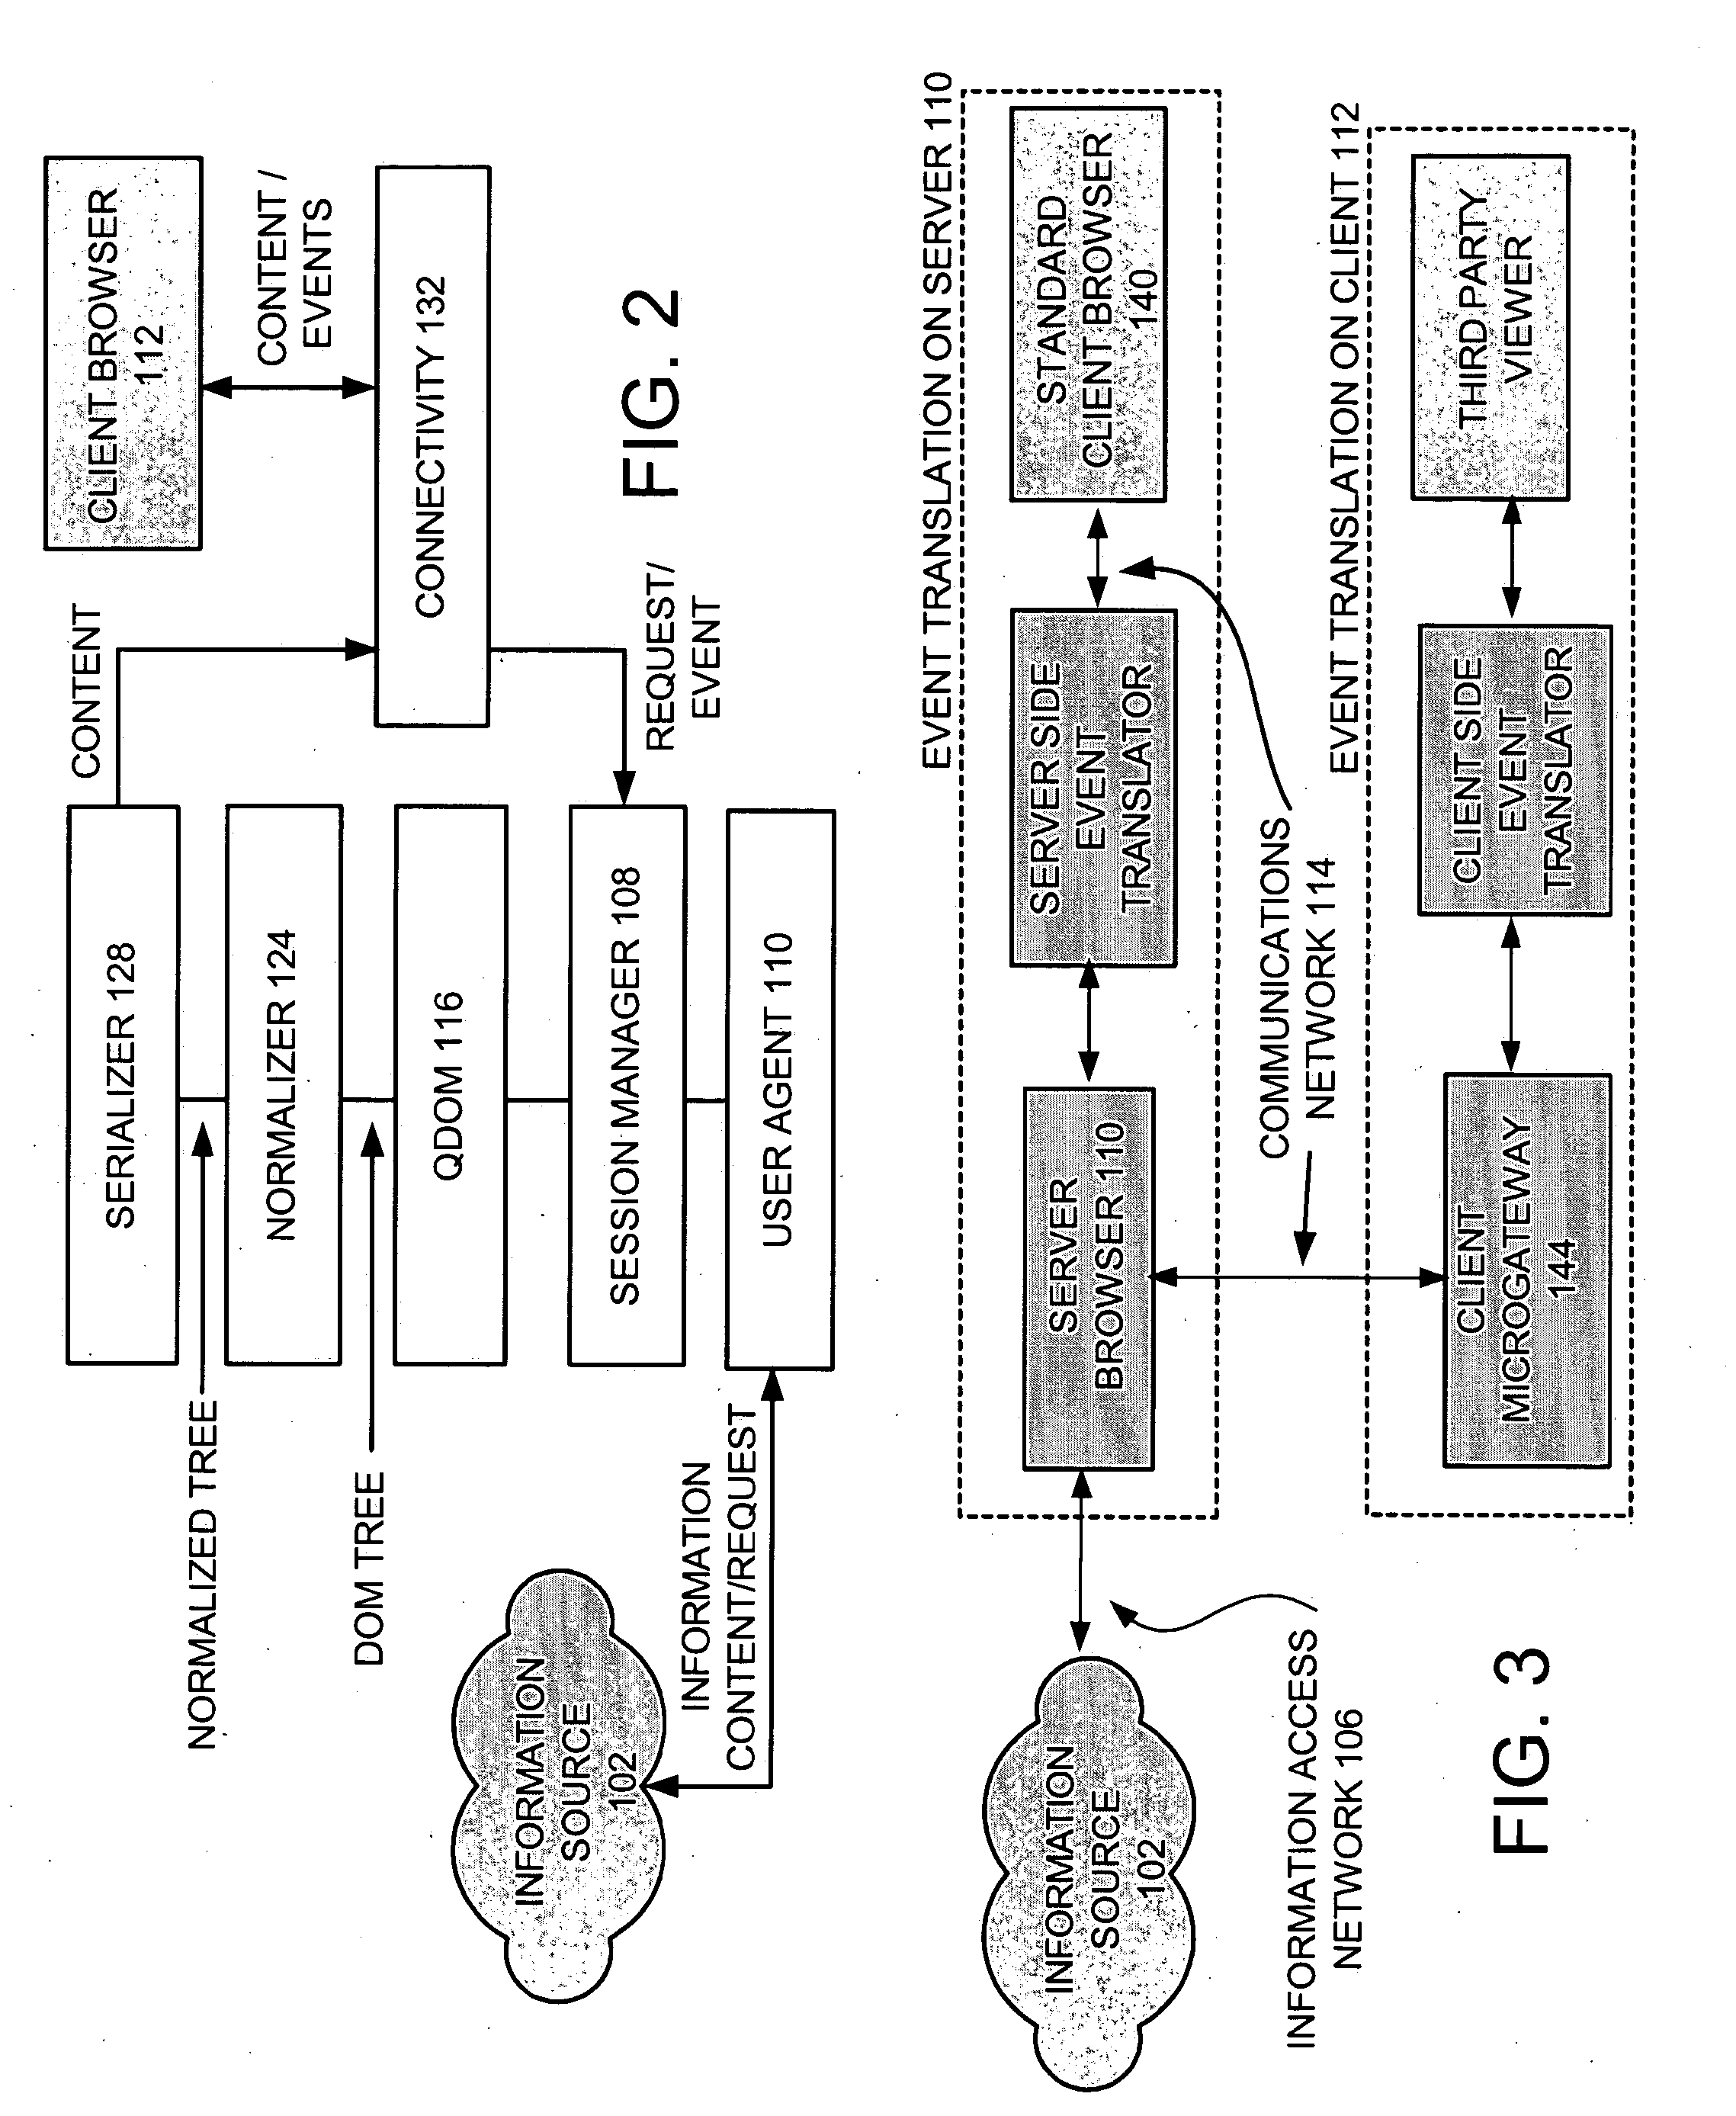 System and Method for Providing and Displaying Information Content